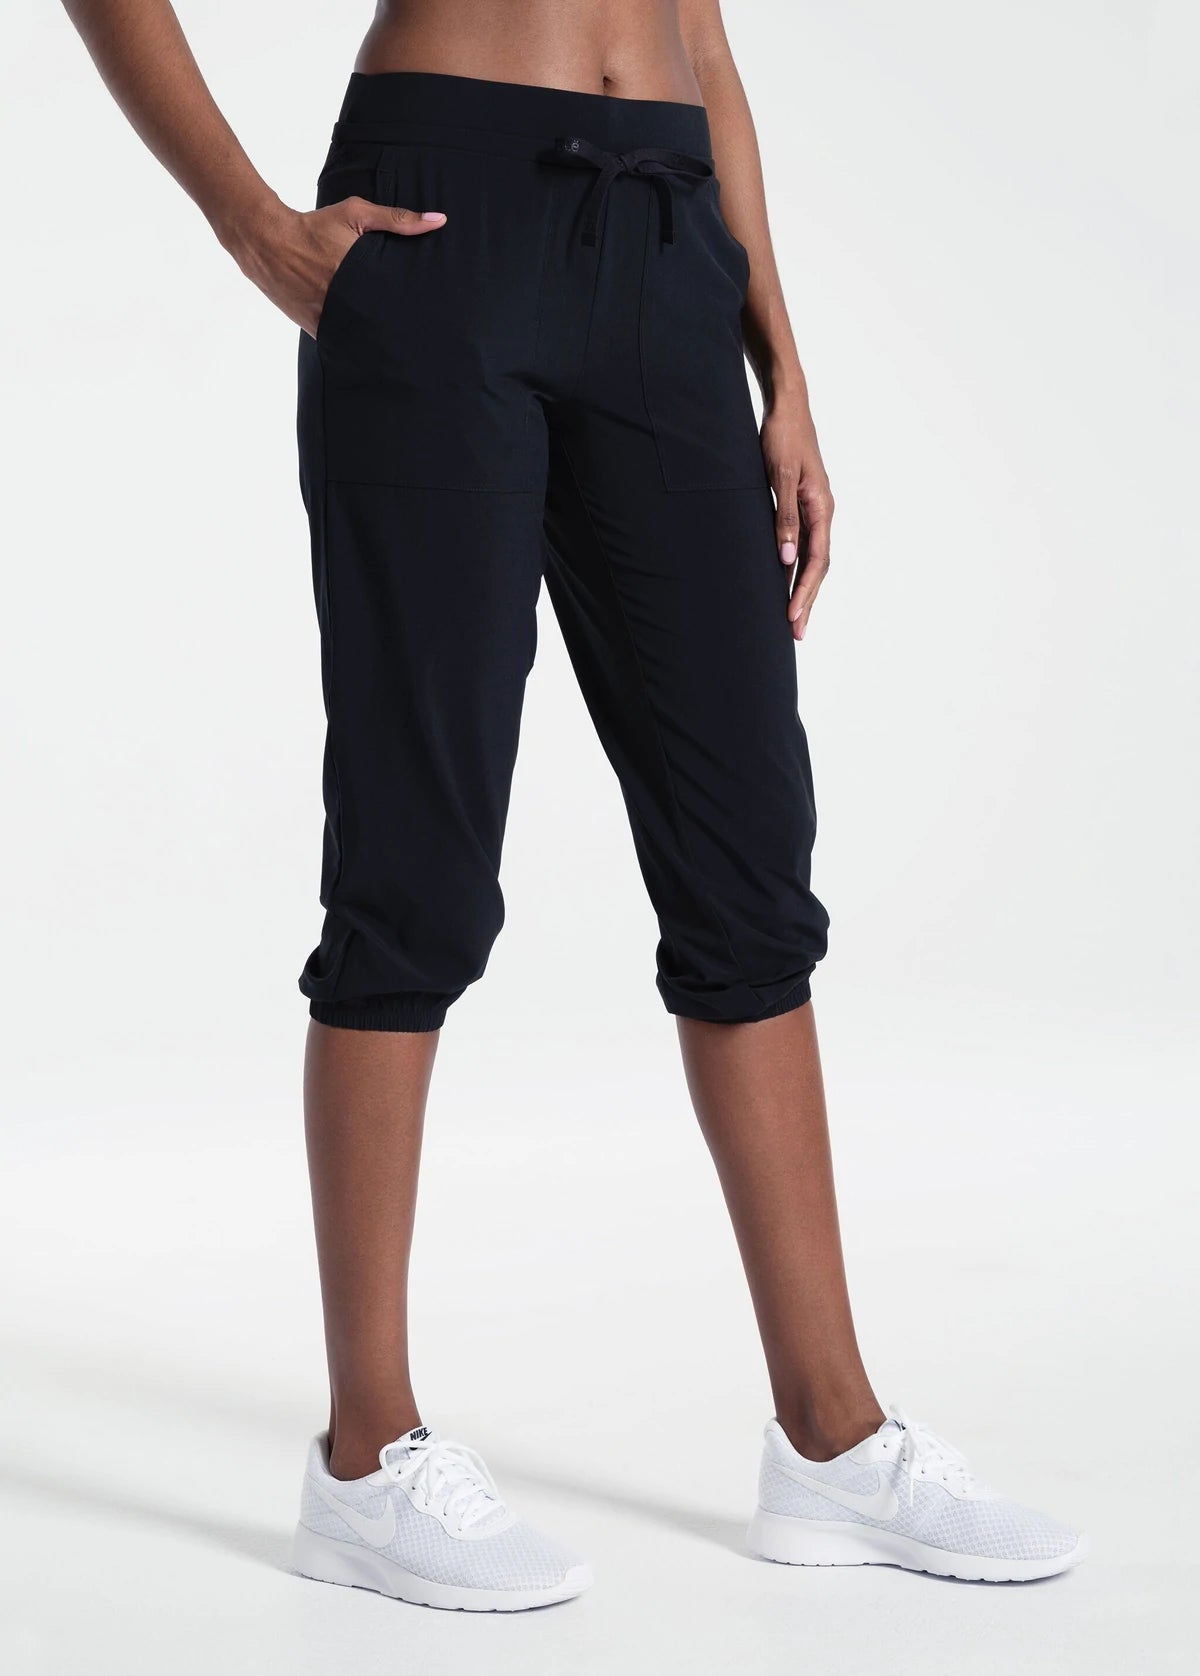 Lole Olivie Capris/Cropped Pants with Pockets